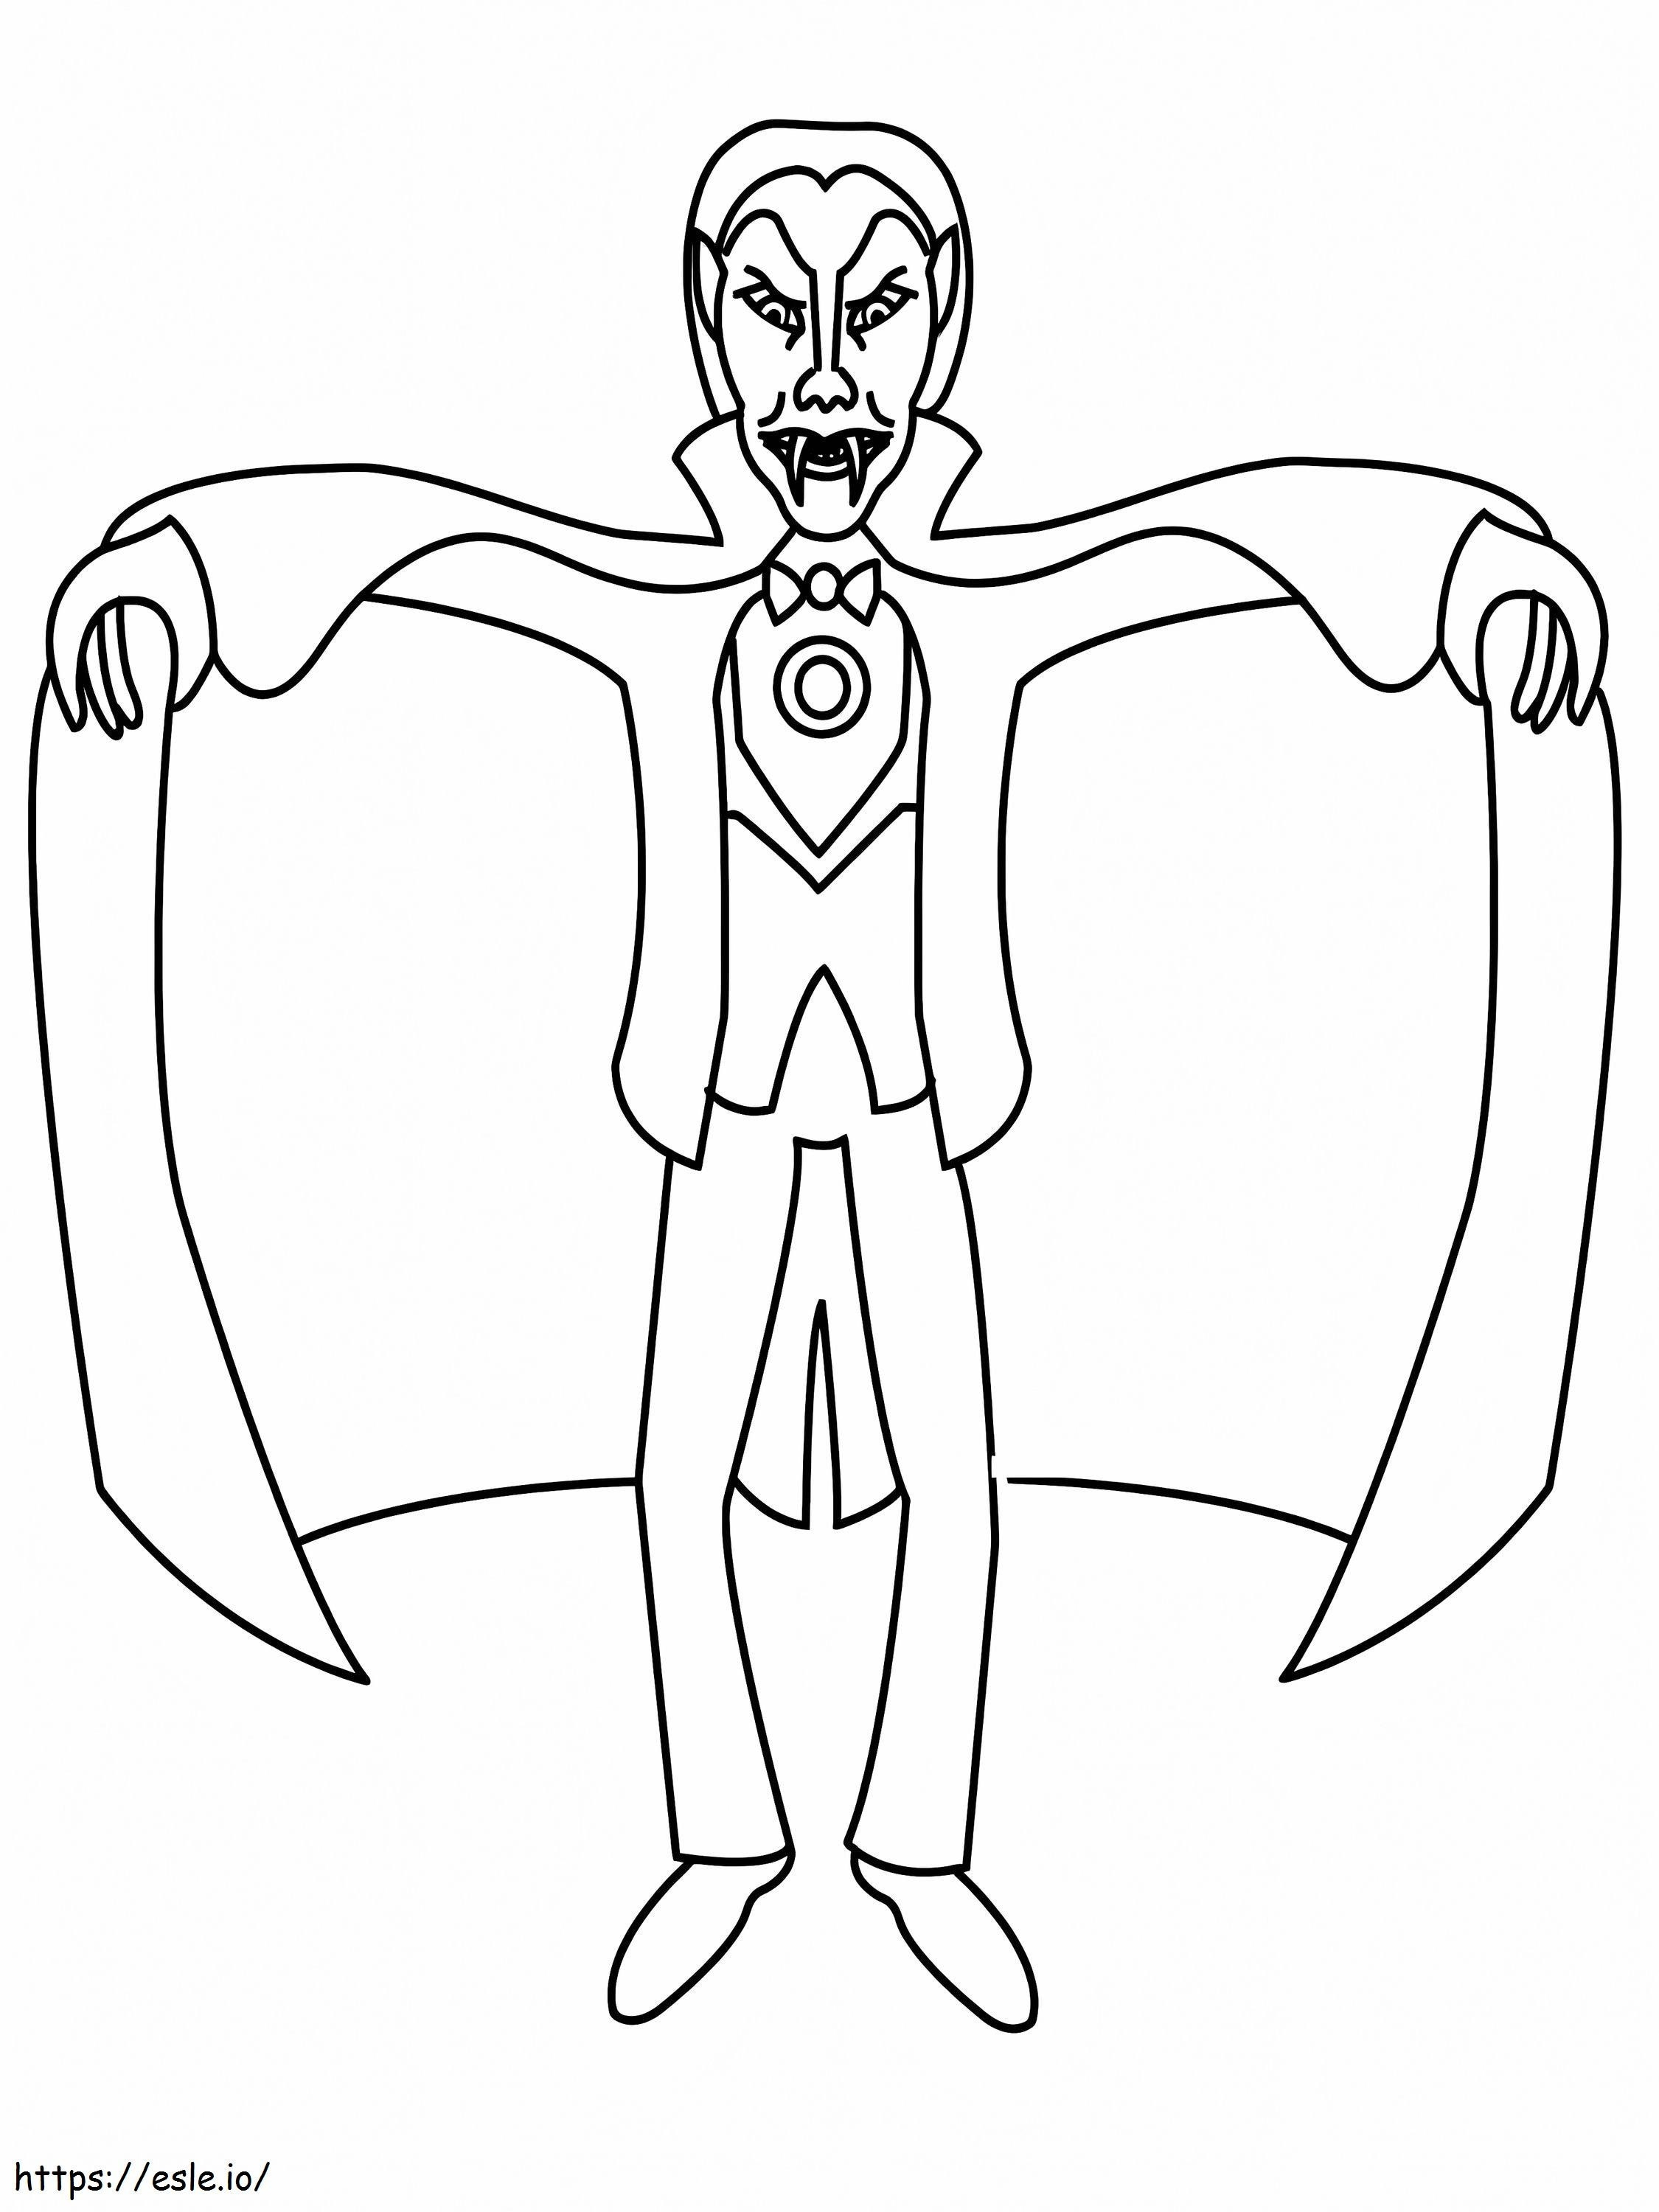 Scary Vampire coloring page